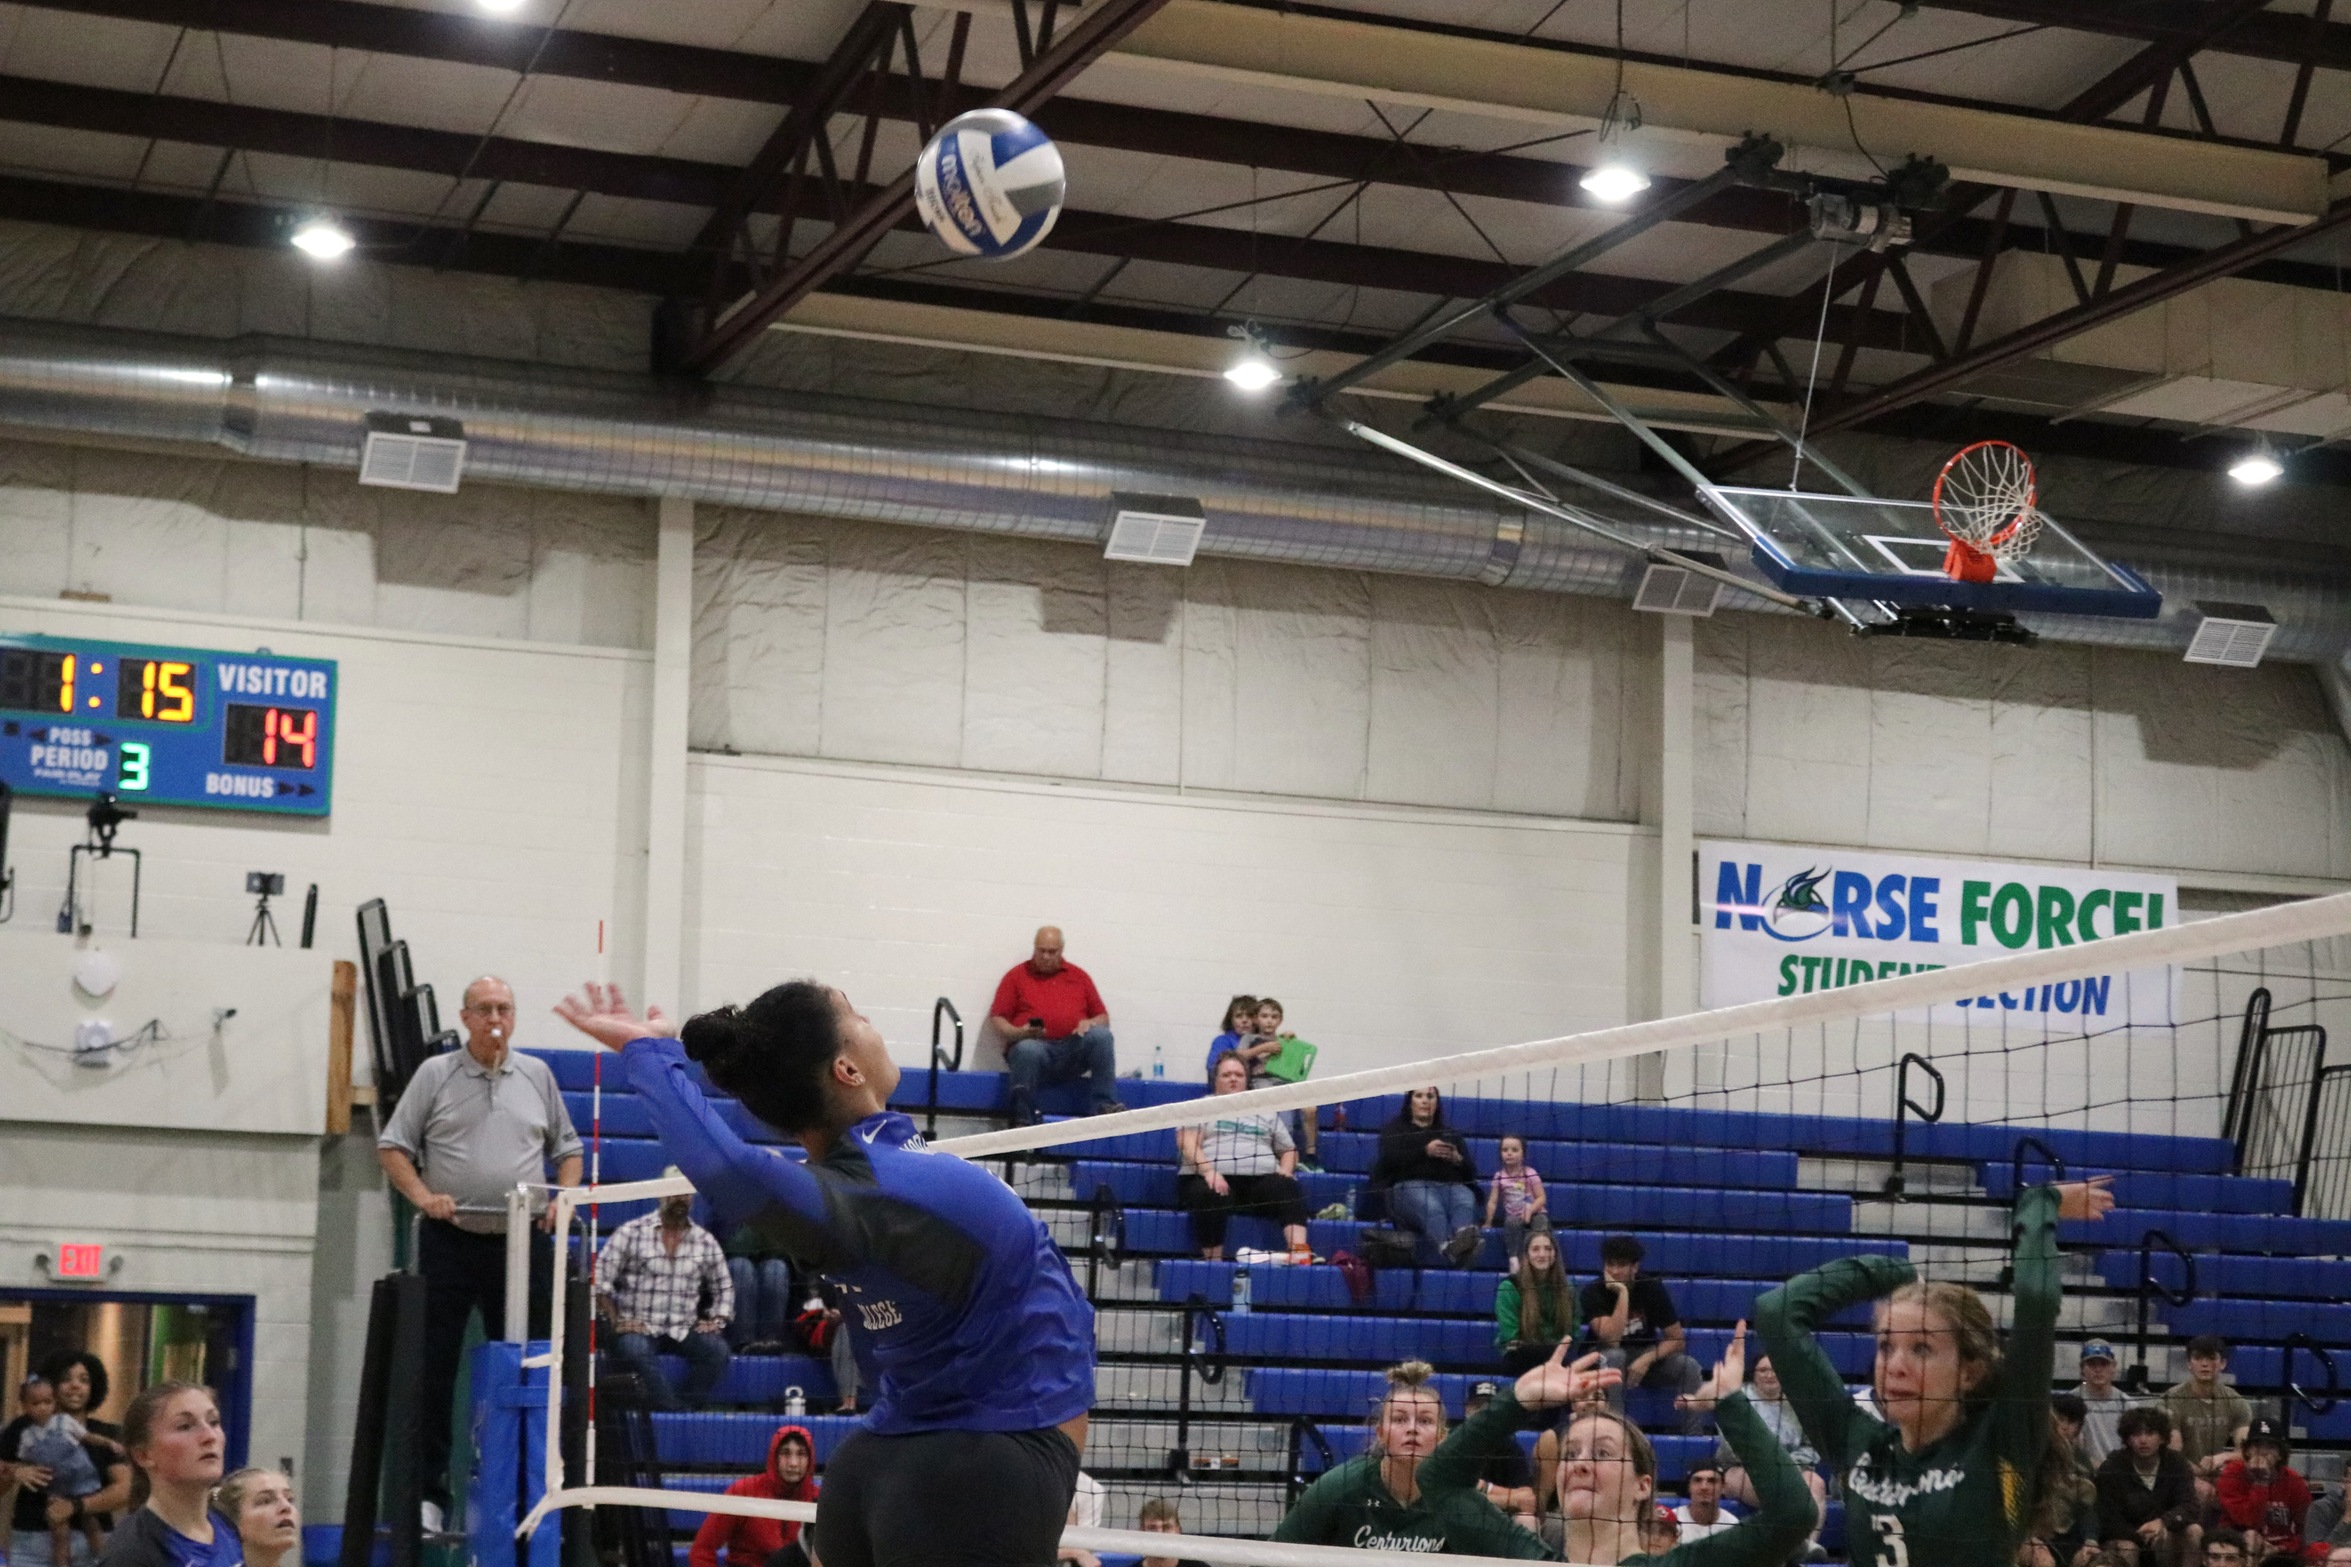 Tianna Taylor leaping up for a kill